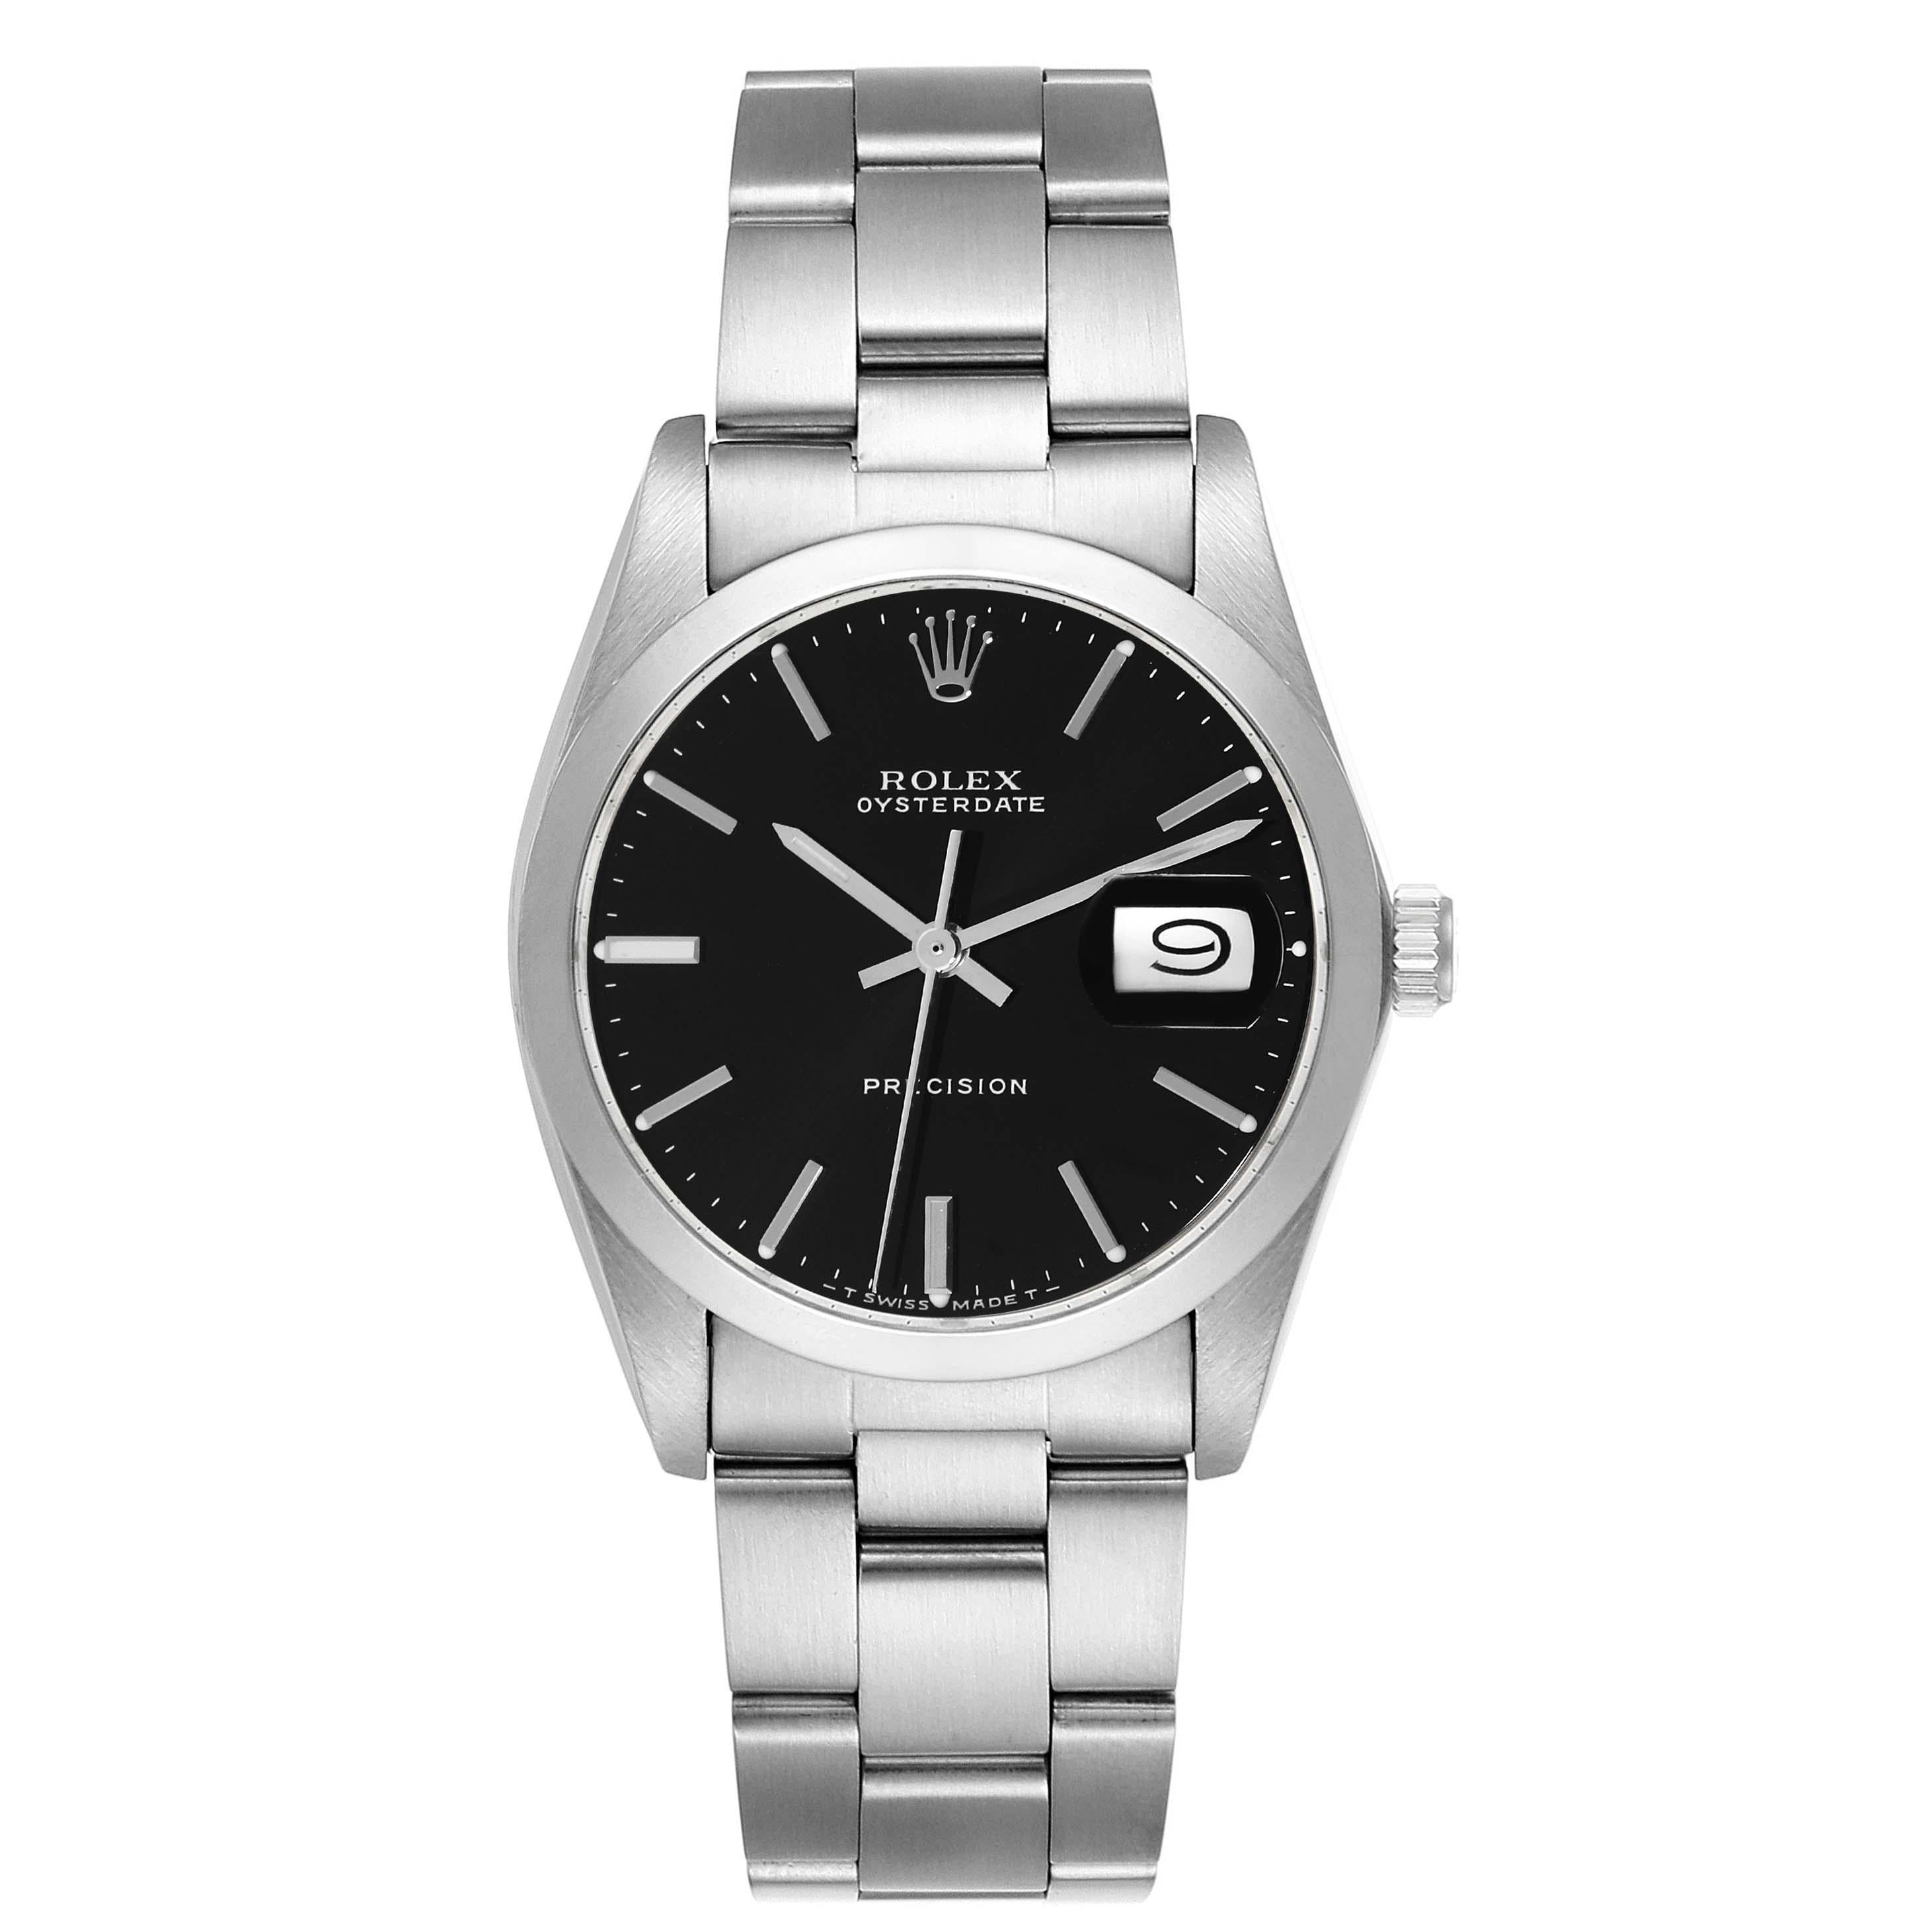 Rolex OysterDate Precision Black Dial Steel Vintage Mens Watch 6694. Manual-winding movement. Stainless steel oyster case 35.0 mm in diameter. Rolex logo on the crown. Stainless steel smooth bezel. Acrylic crystal with cyclops magnifier. Black dial